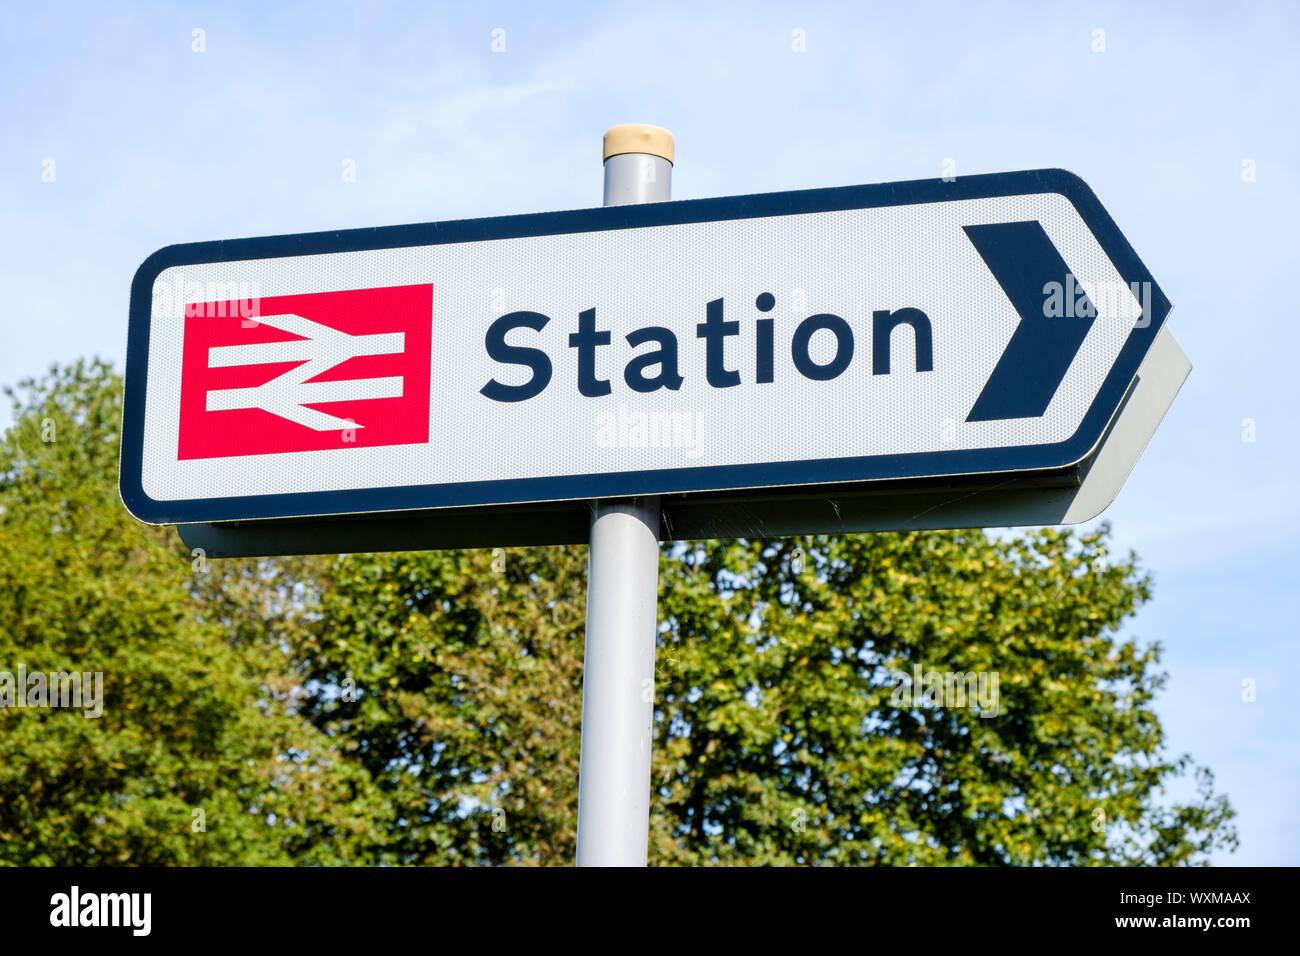 Train station directional sign for road users giving the direction to a railway station, England, UK Stock Photo